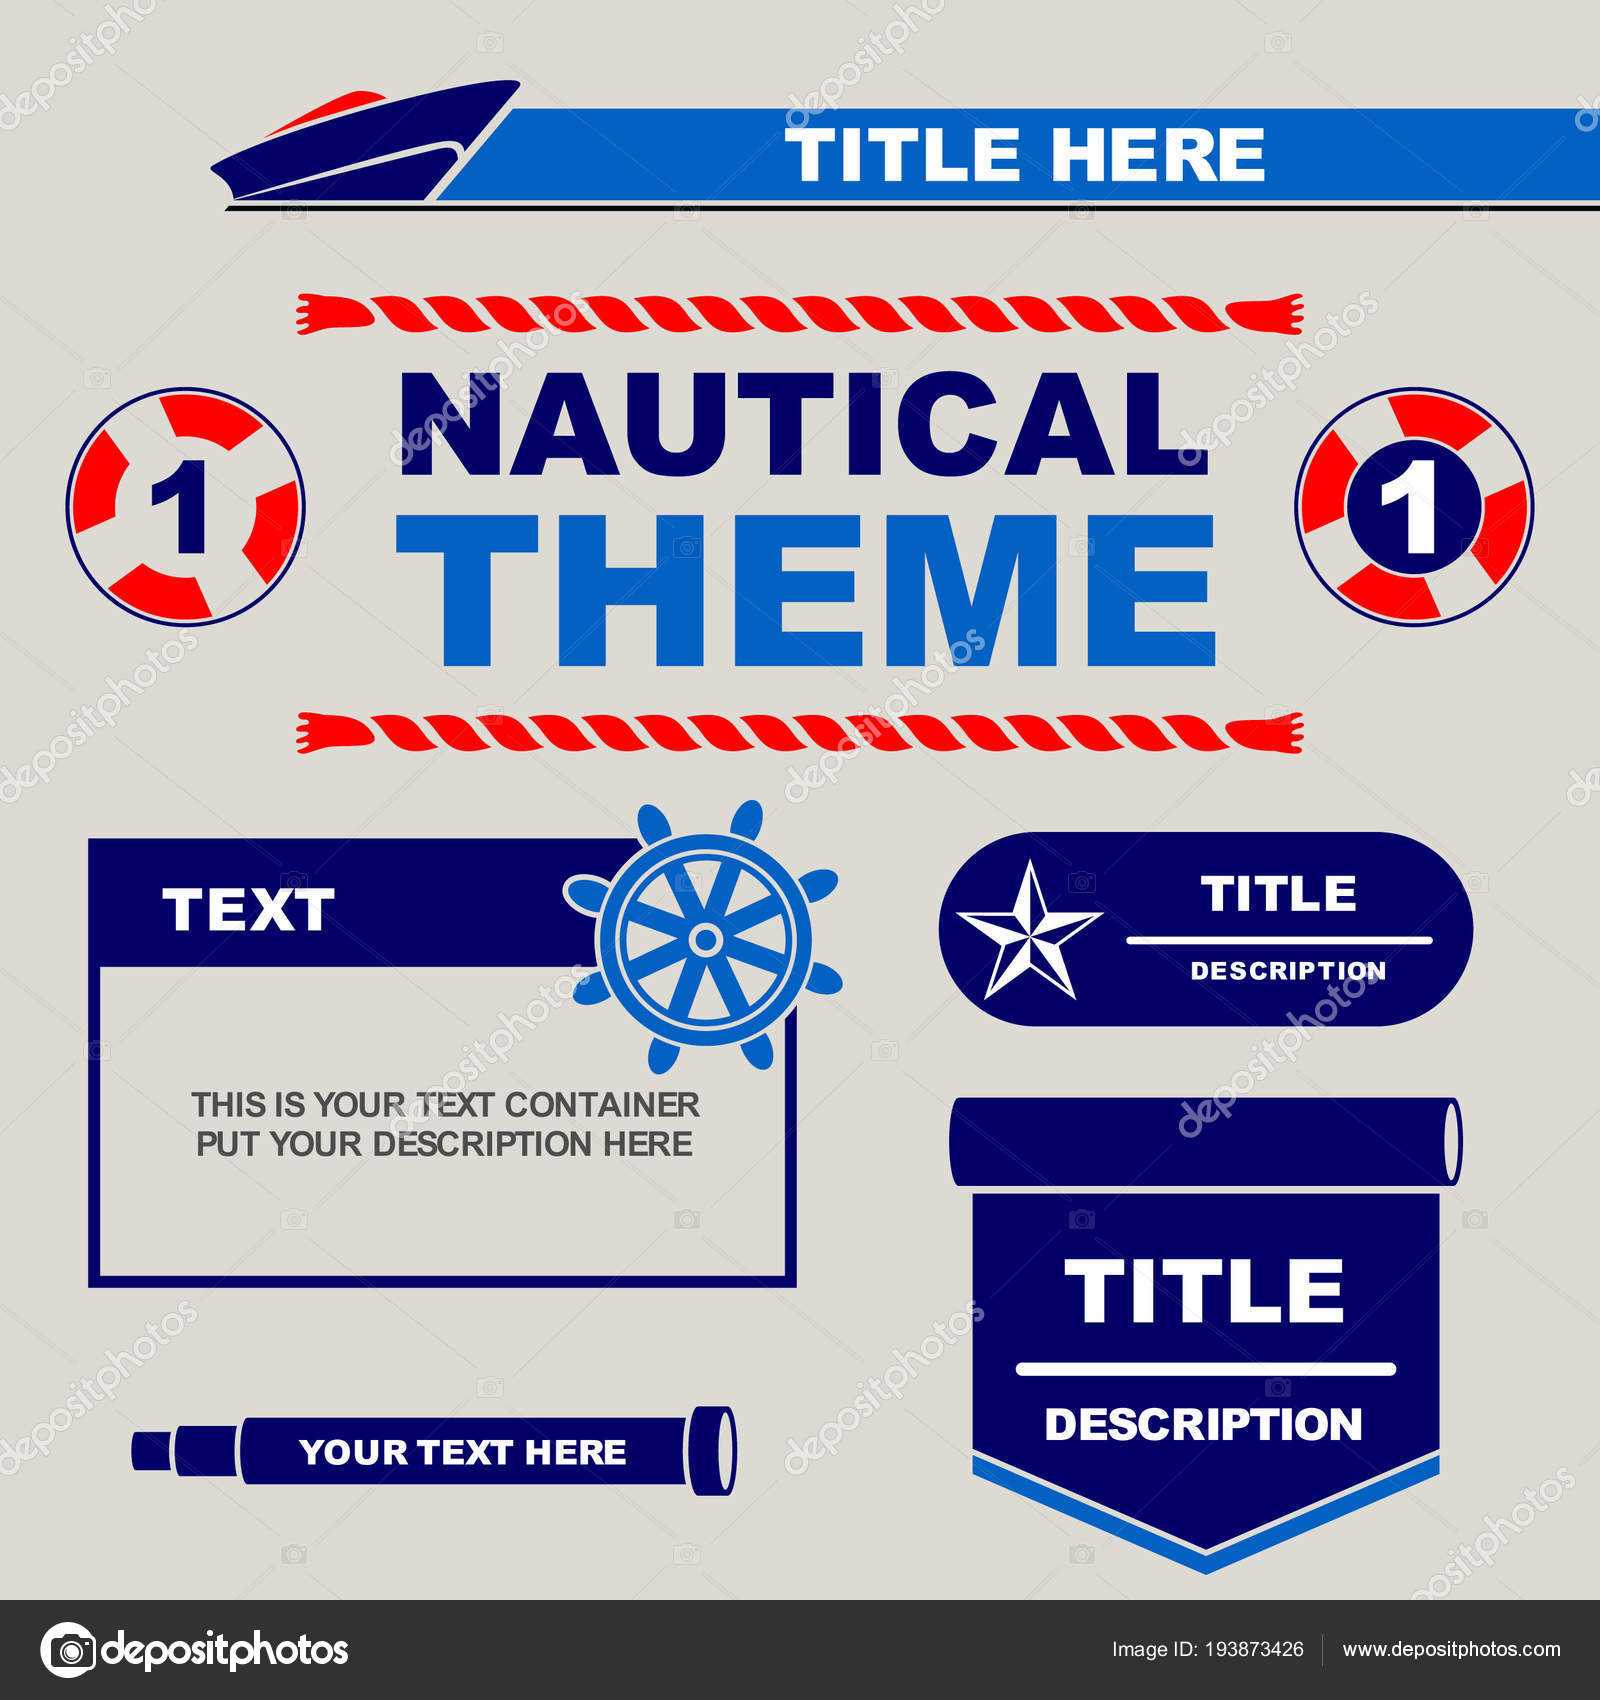 Nautical Theme Design Template You Can Use Flyers Banner Regarding Nautical Banner Template